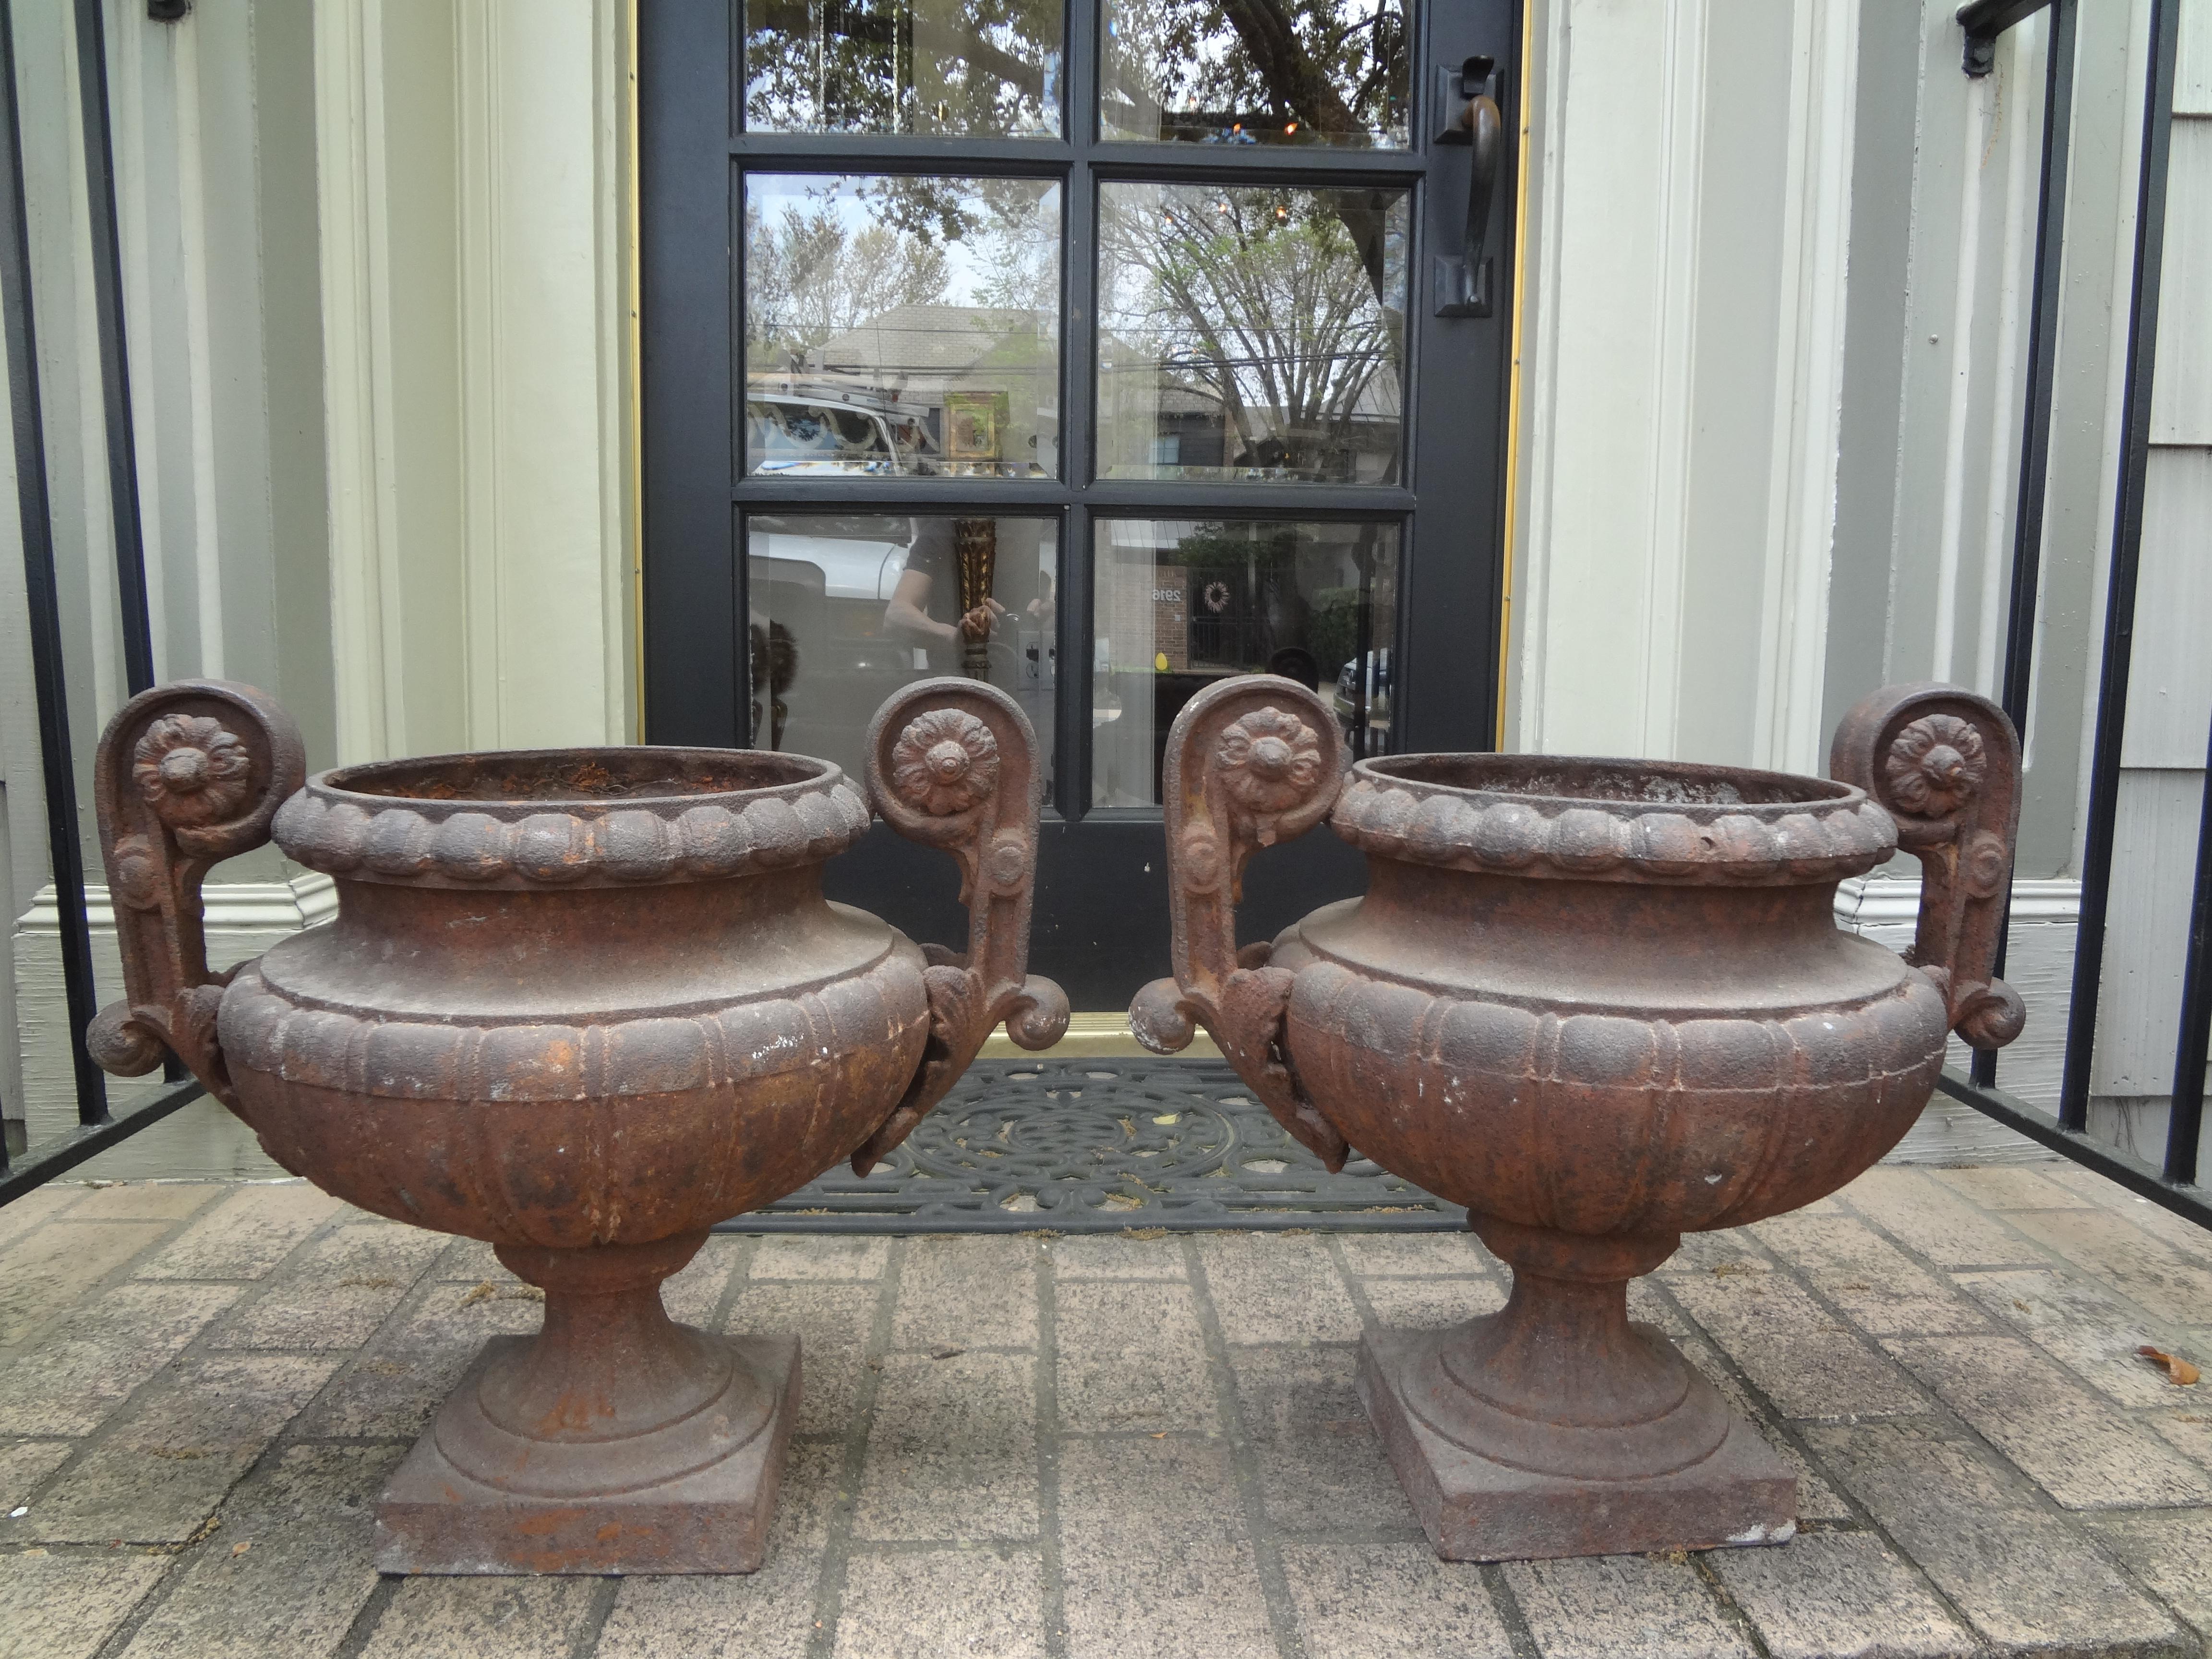 Pair of 19th century French cast iron garden urns with handles. These stunning French iron urns, planters or jardinieres have beautiful handles are the perfect size to be used indoors or outdoors.